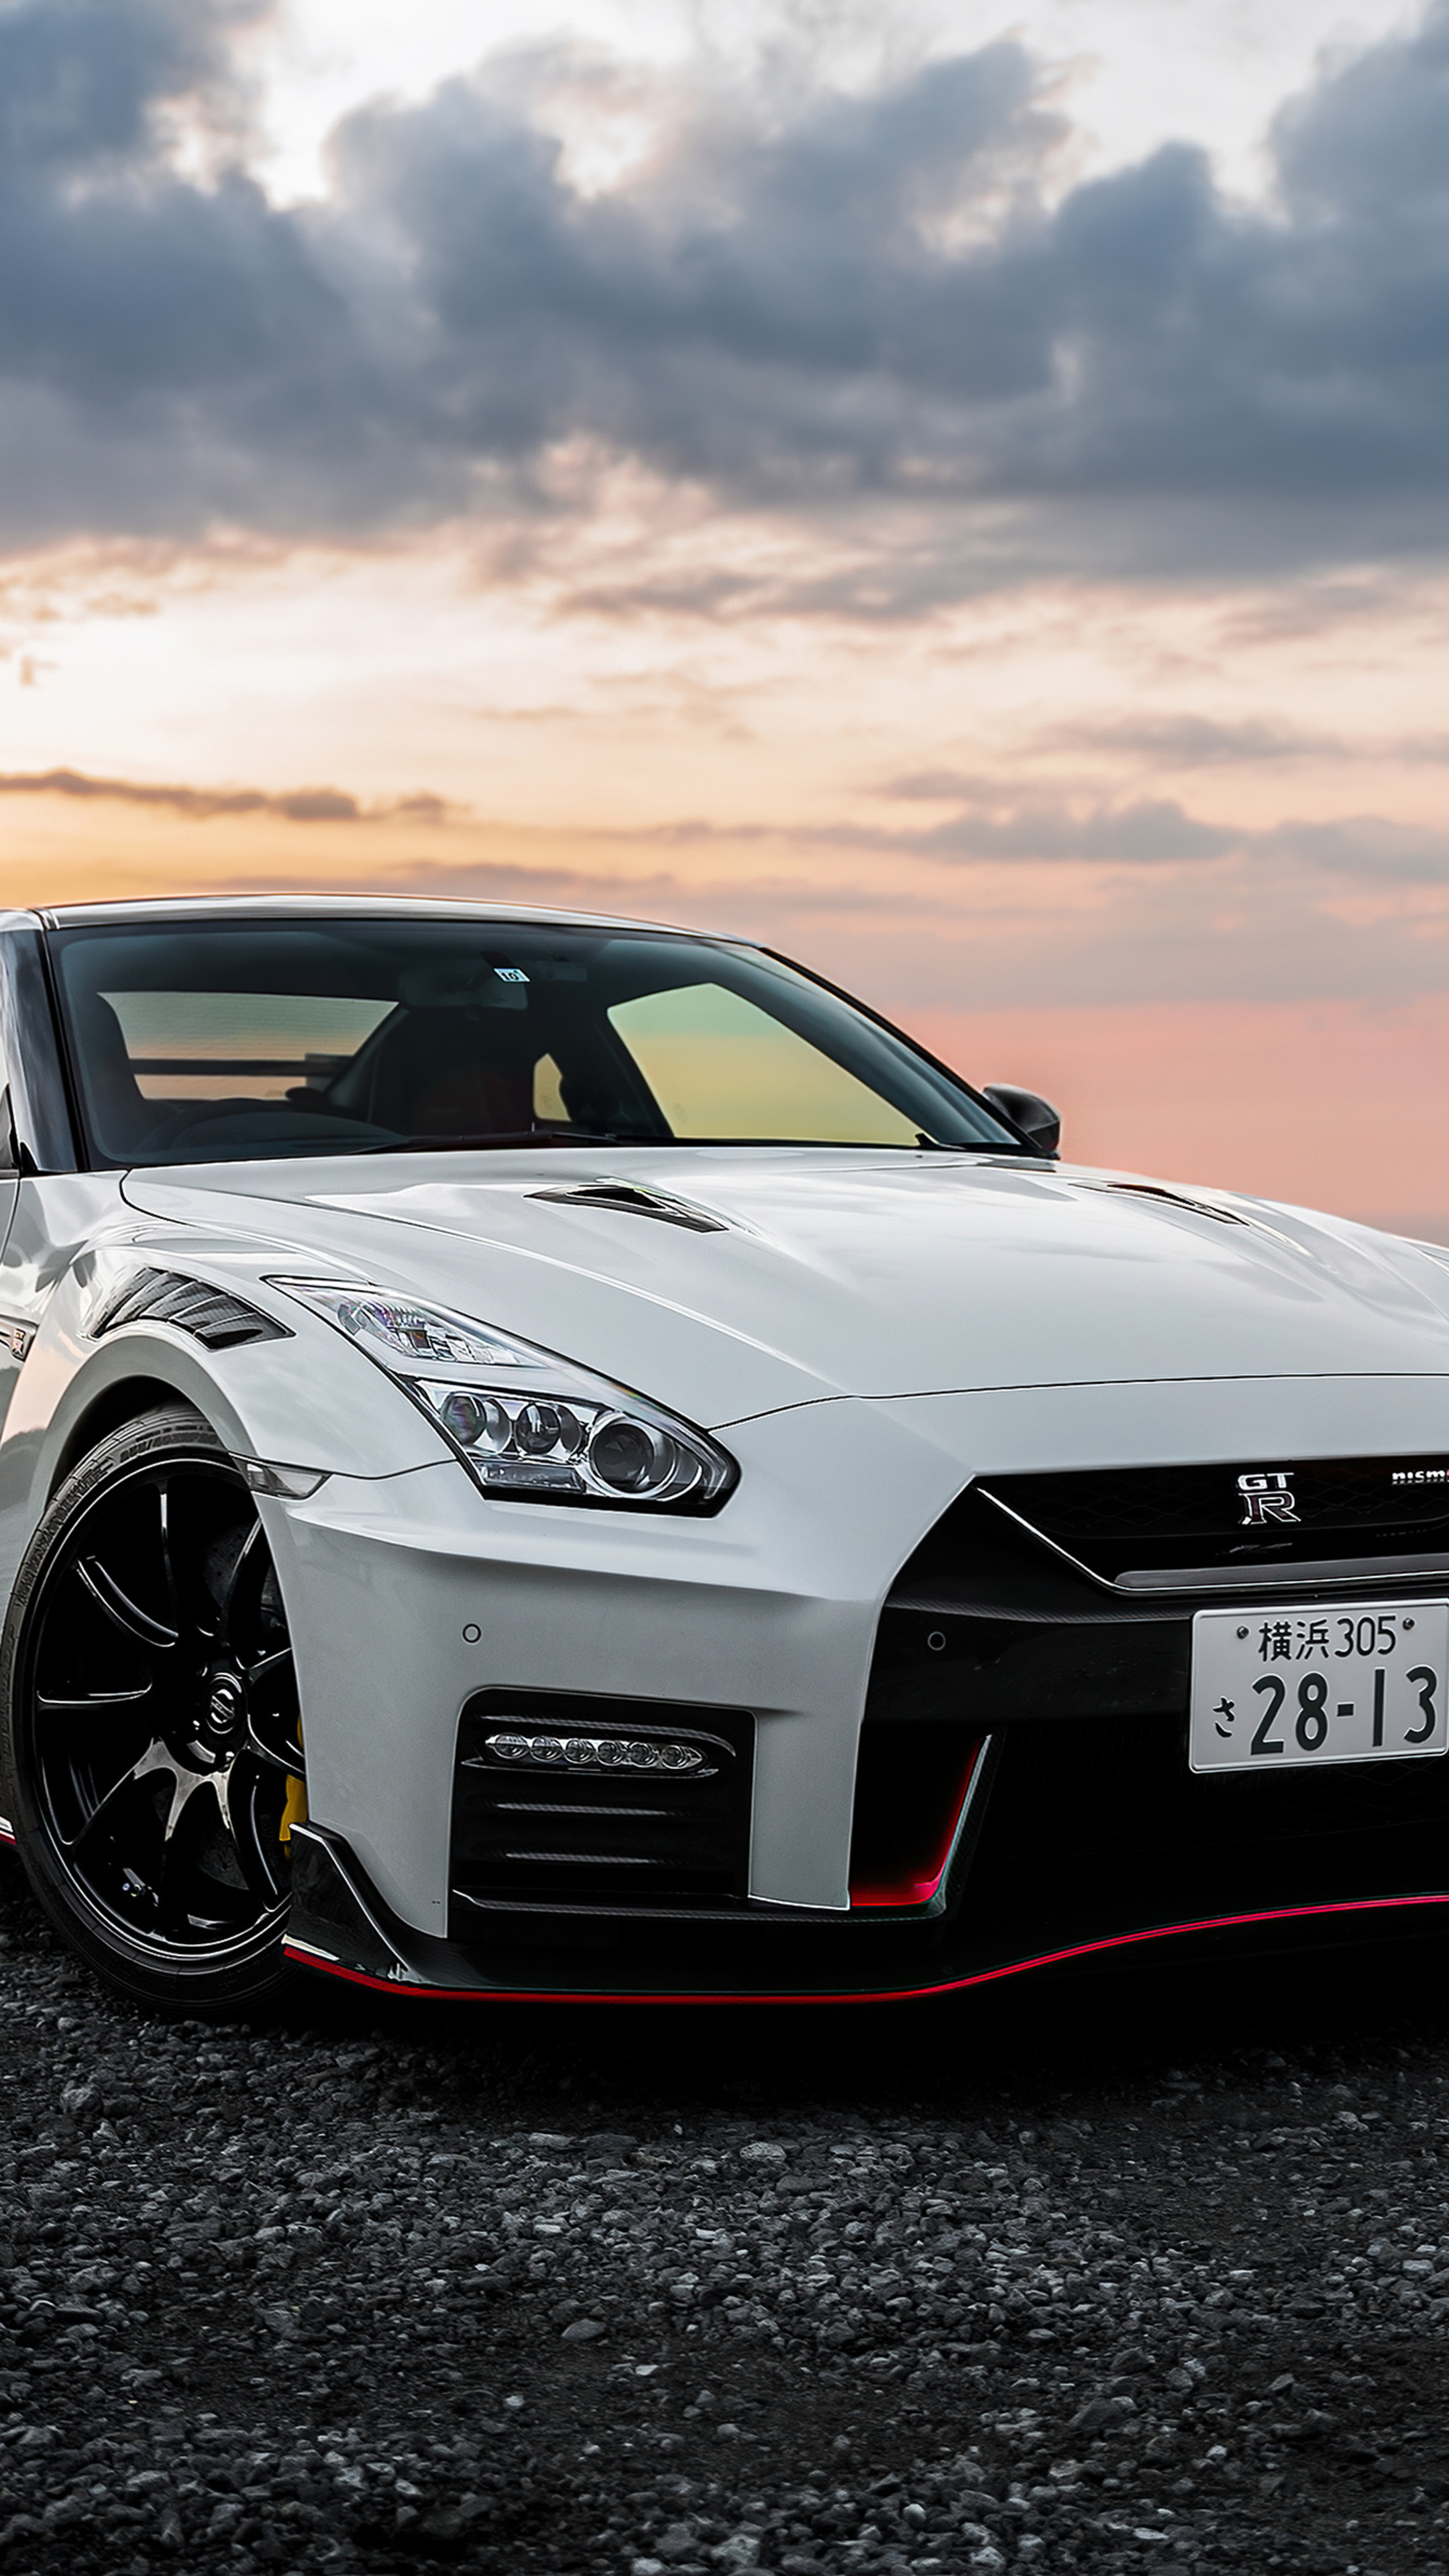 Nissan GT-R, NISMO edition, Sony Xperia exclusive, Thrilling sports car, 2160x3840 4K Phone